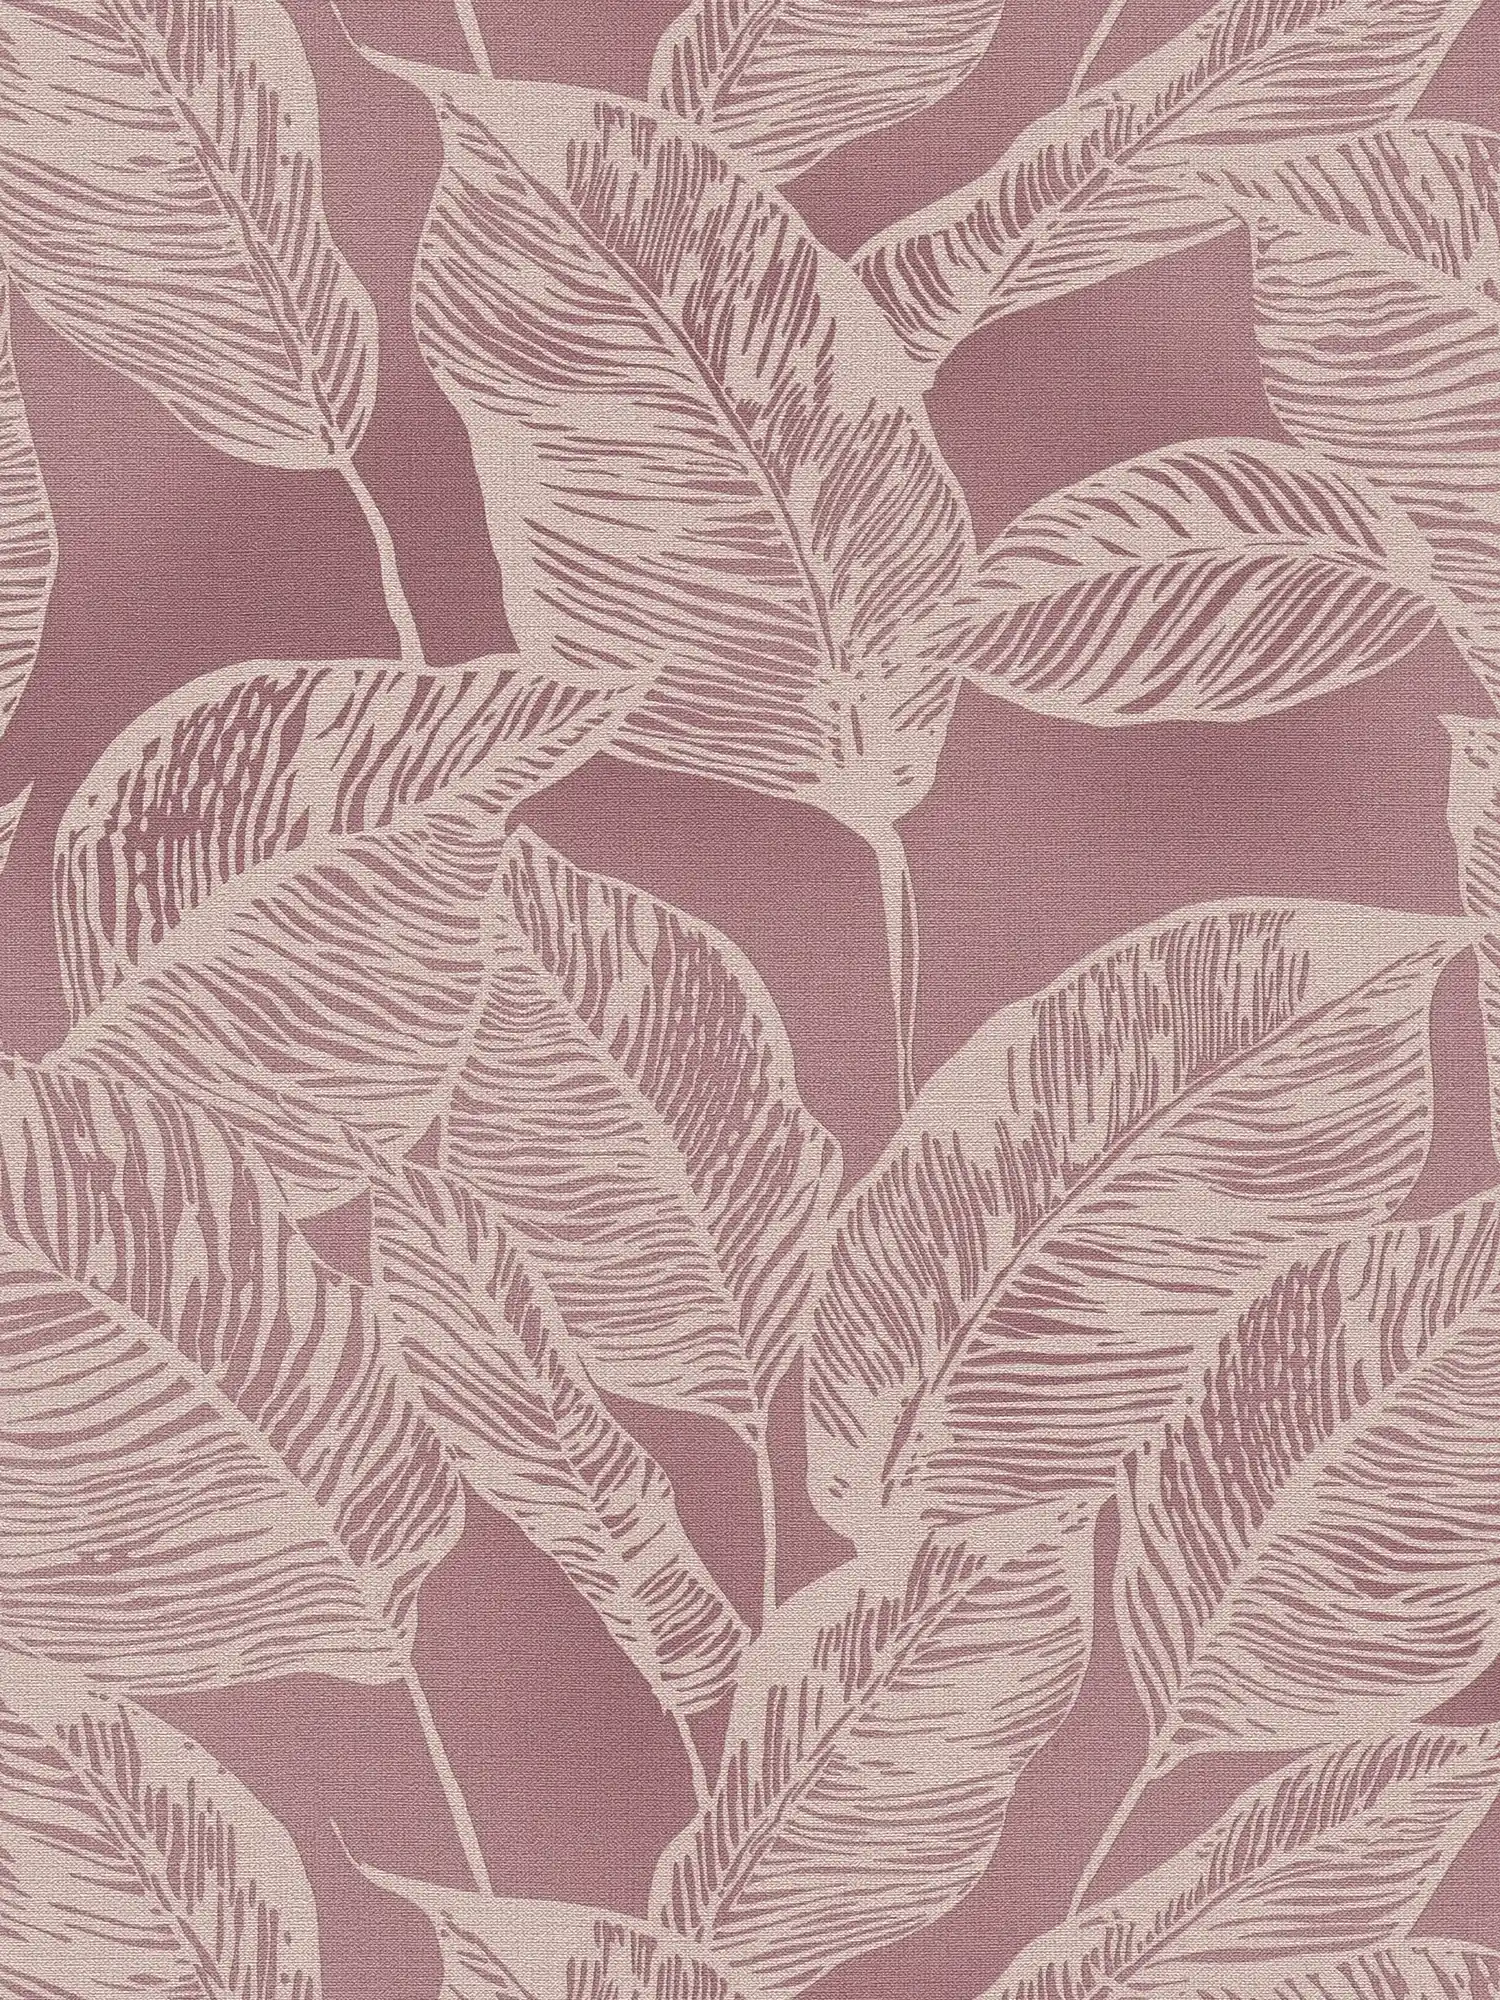 PVC-free non-woven wallpaper with leaf motif - pink, cream
